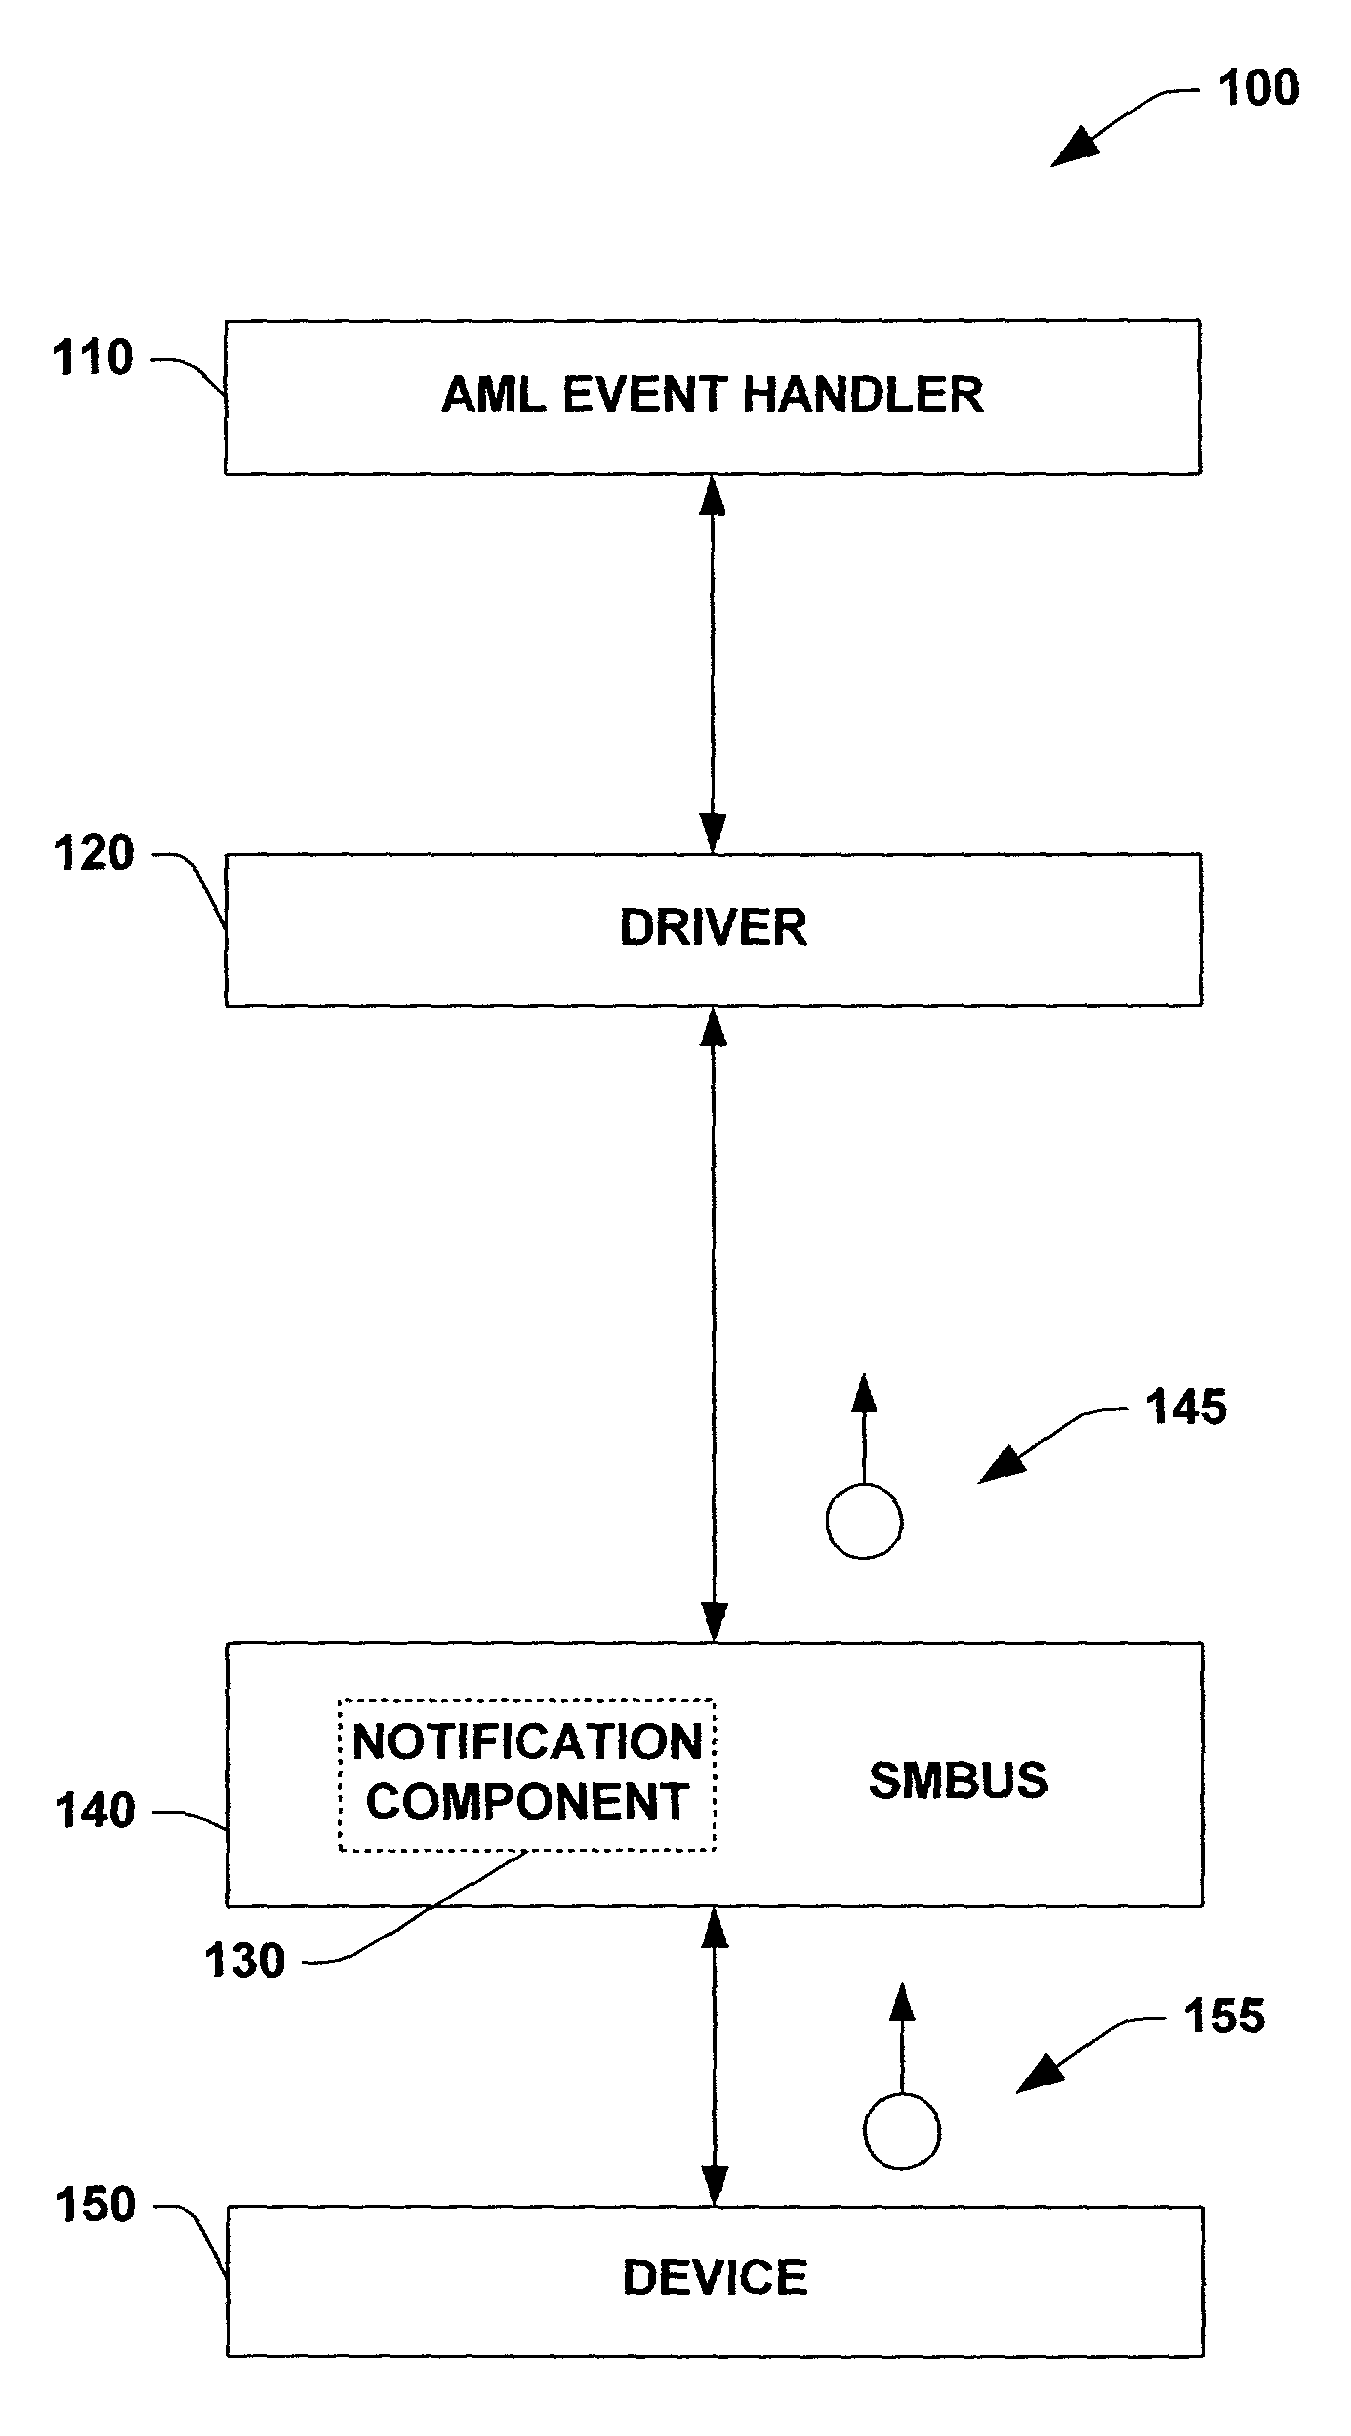 Employing three parameter buffer access in connection with SMBus notifications